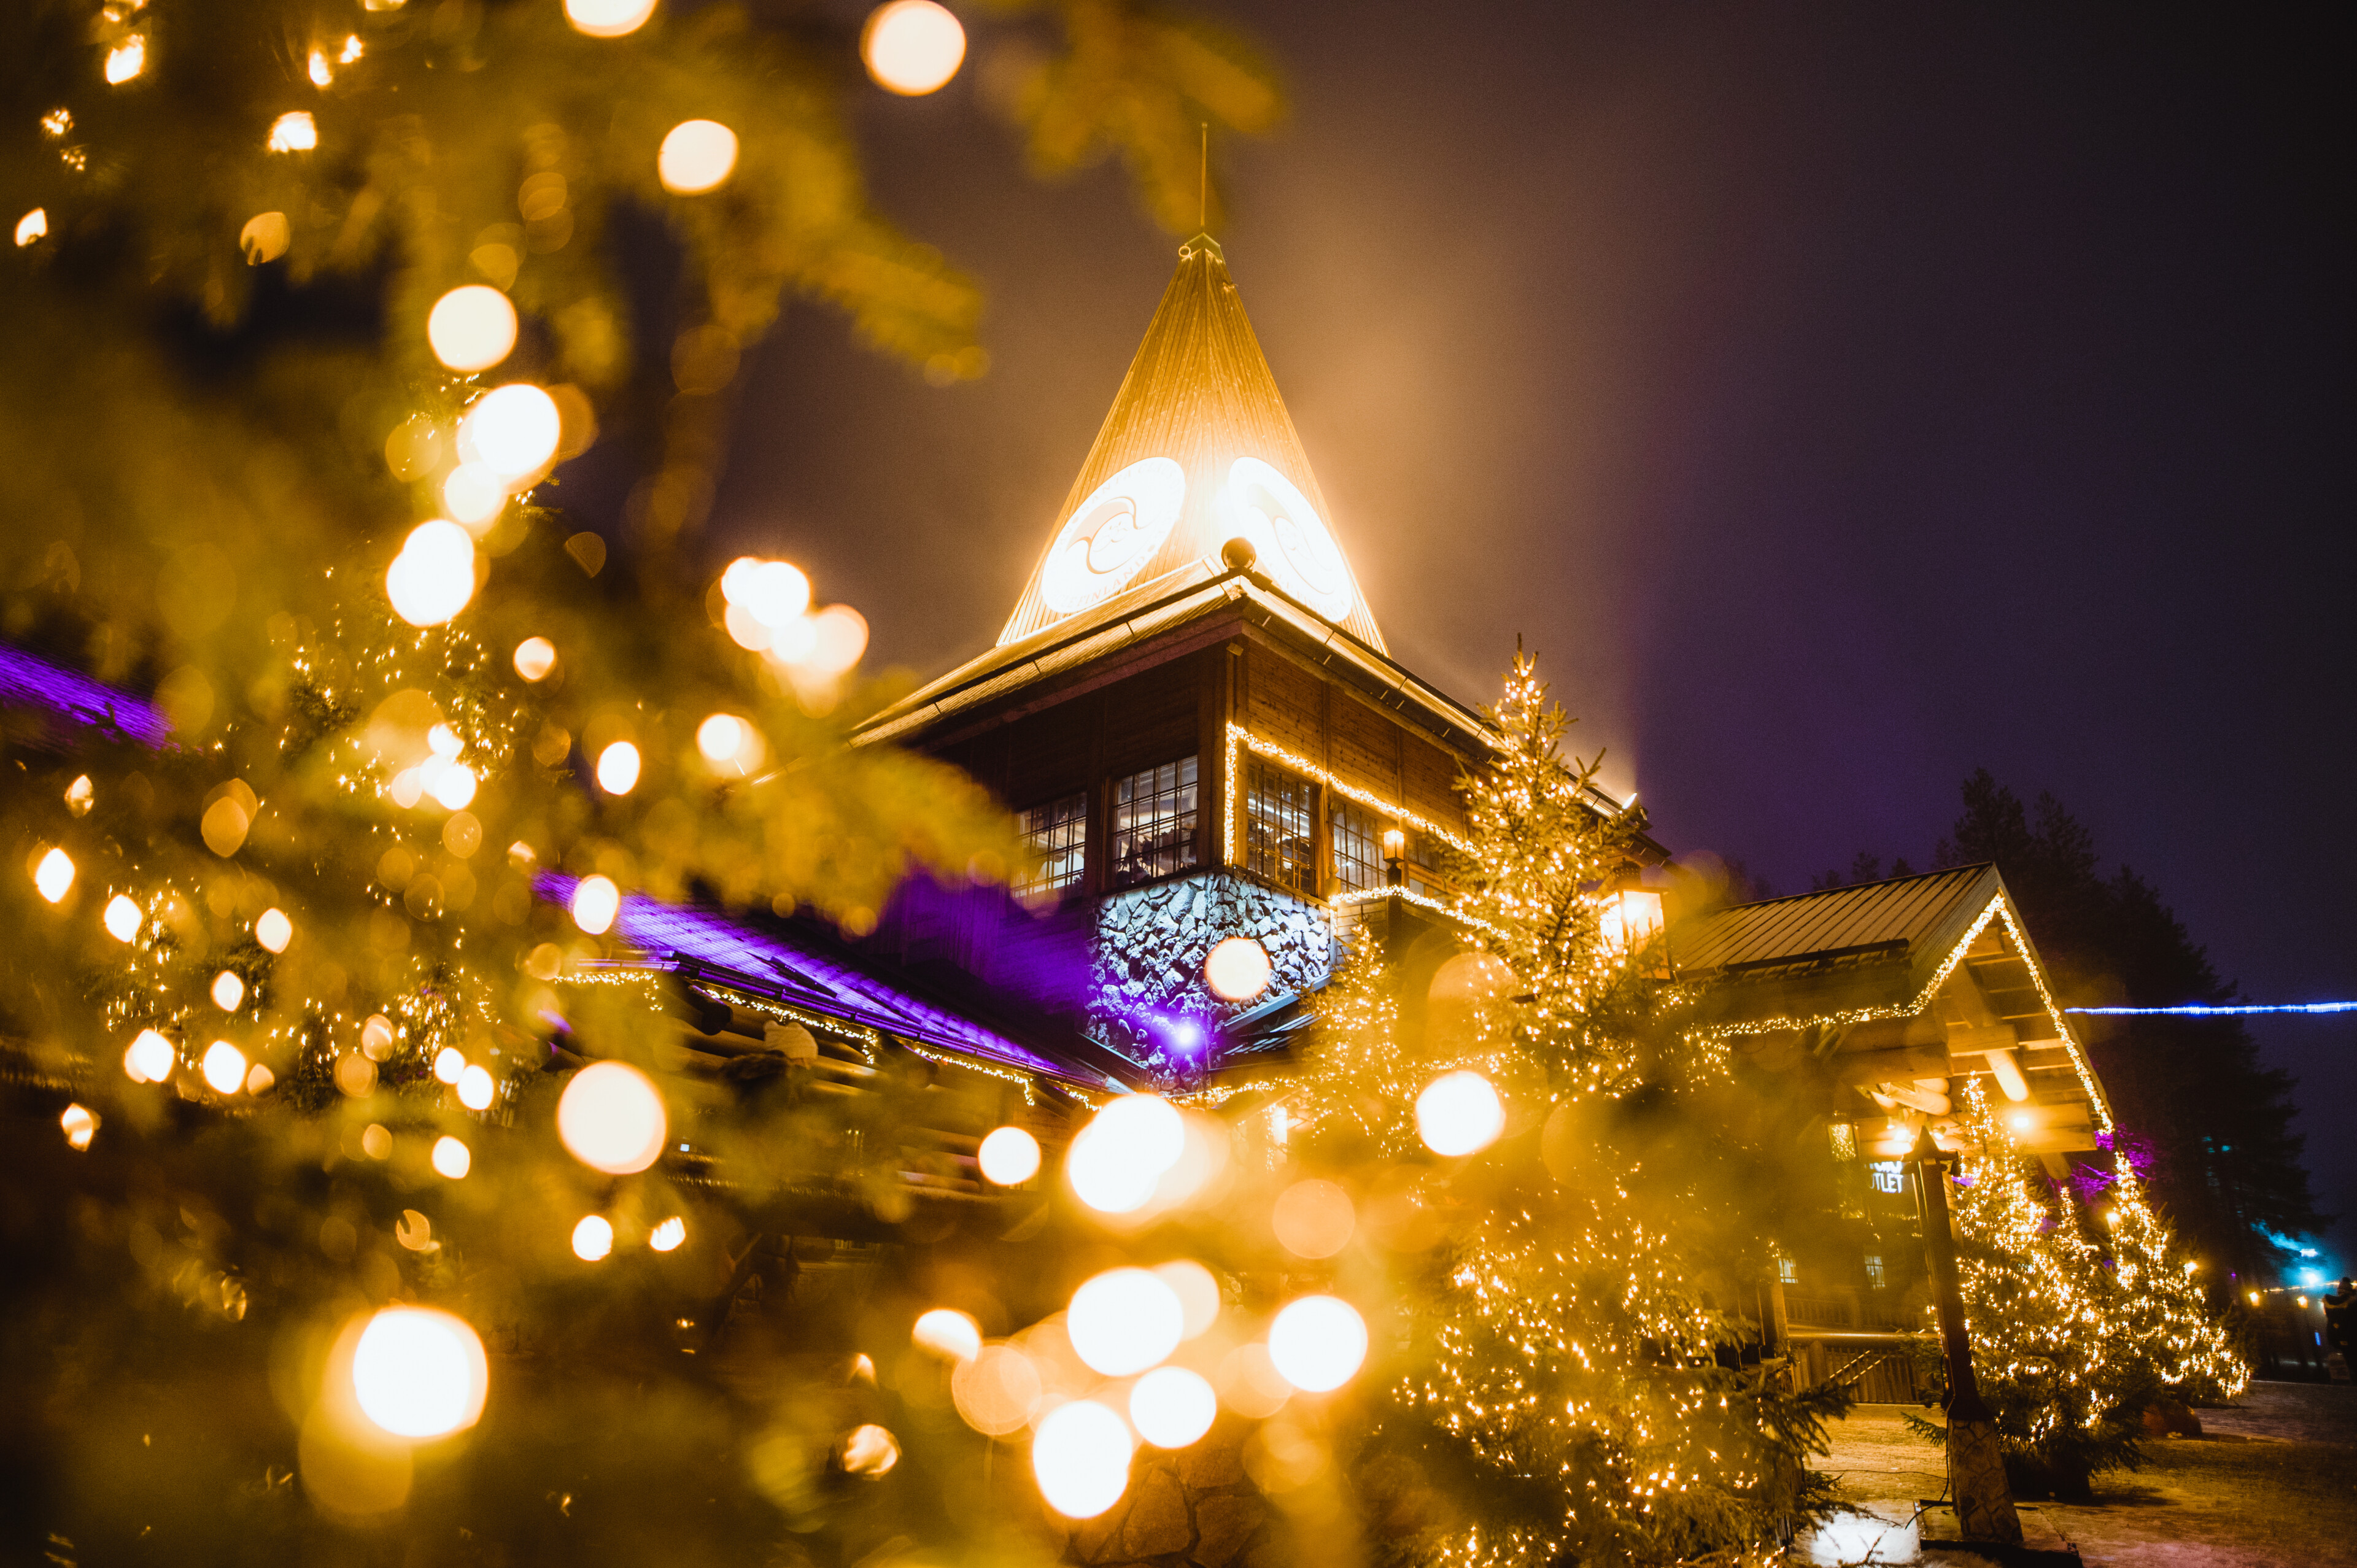 Santa Claus Village at the Arctic Circle with Christmas lights during winter with snow in Rovaniemi, Lapland, Finland.